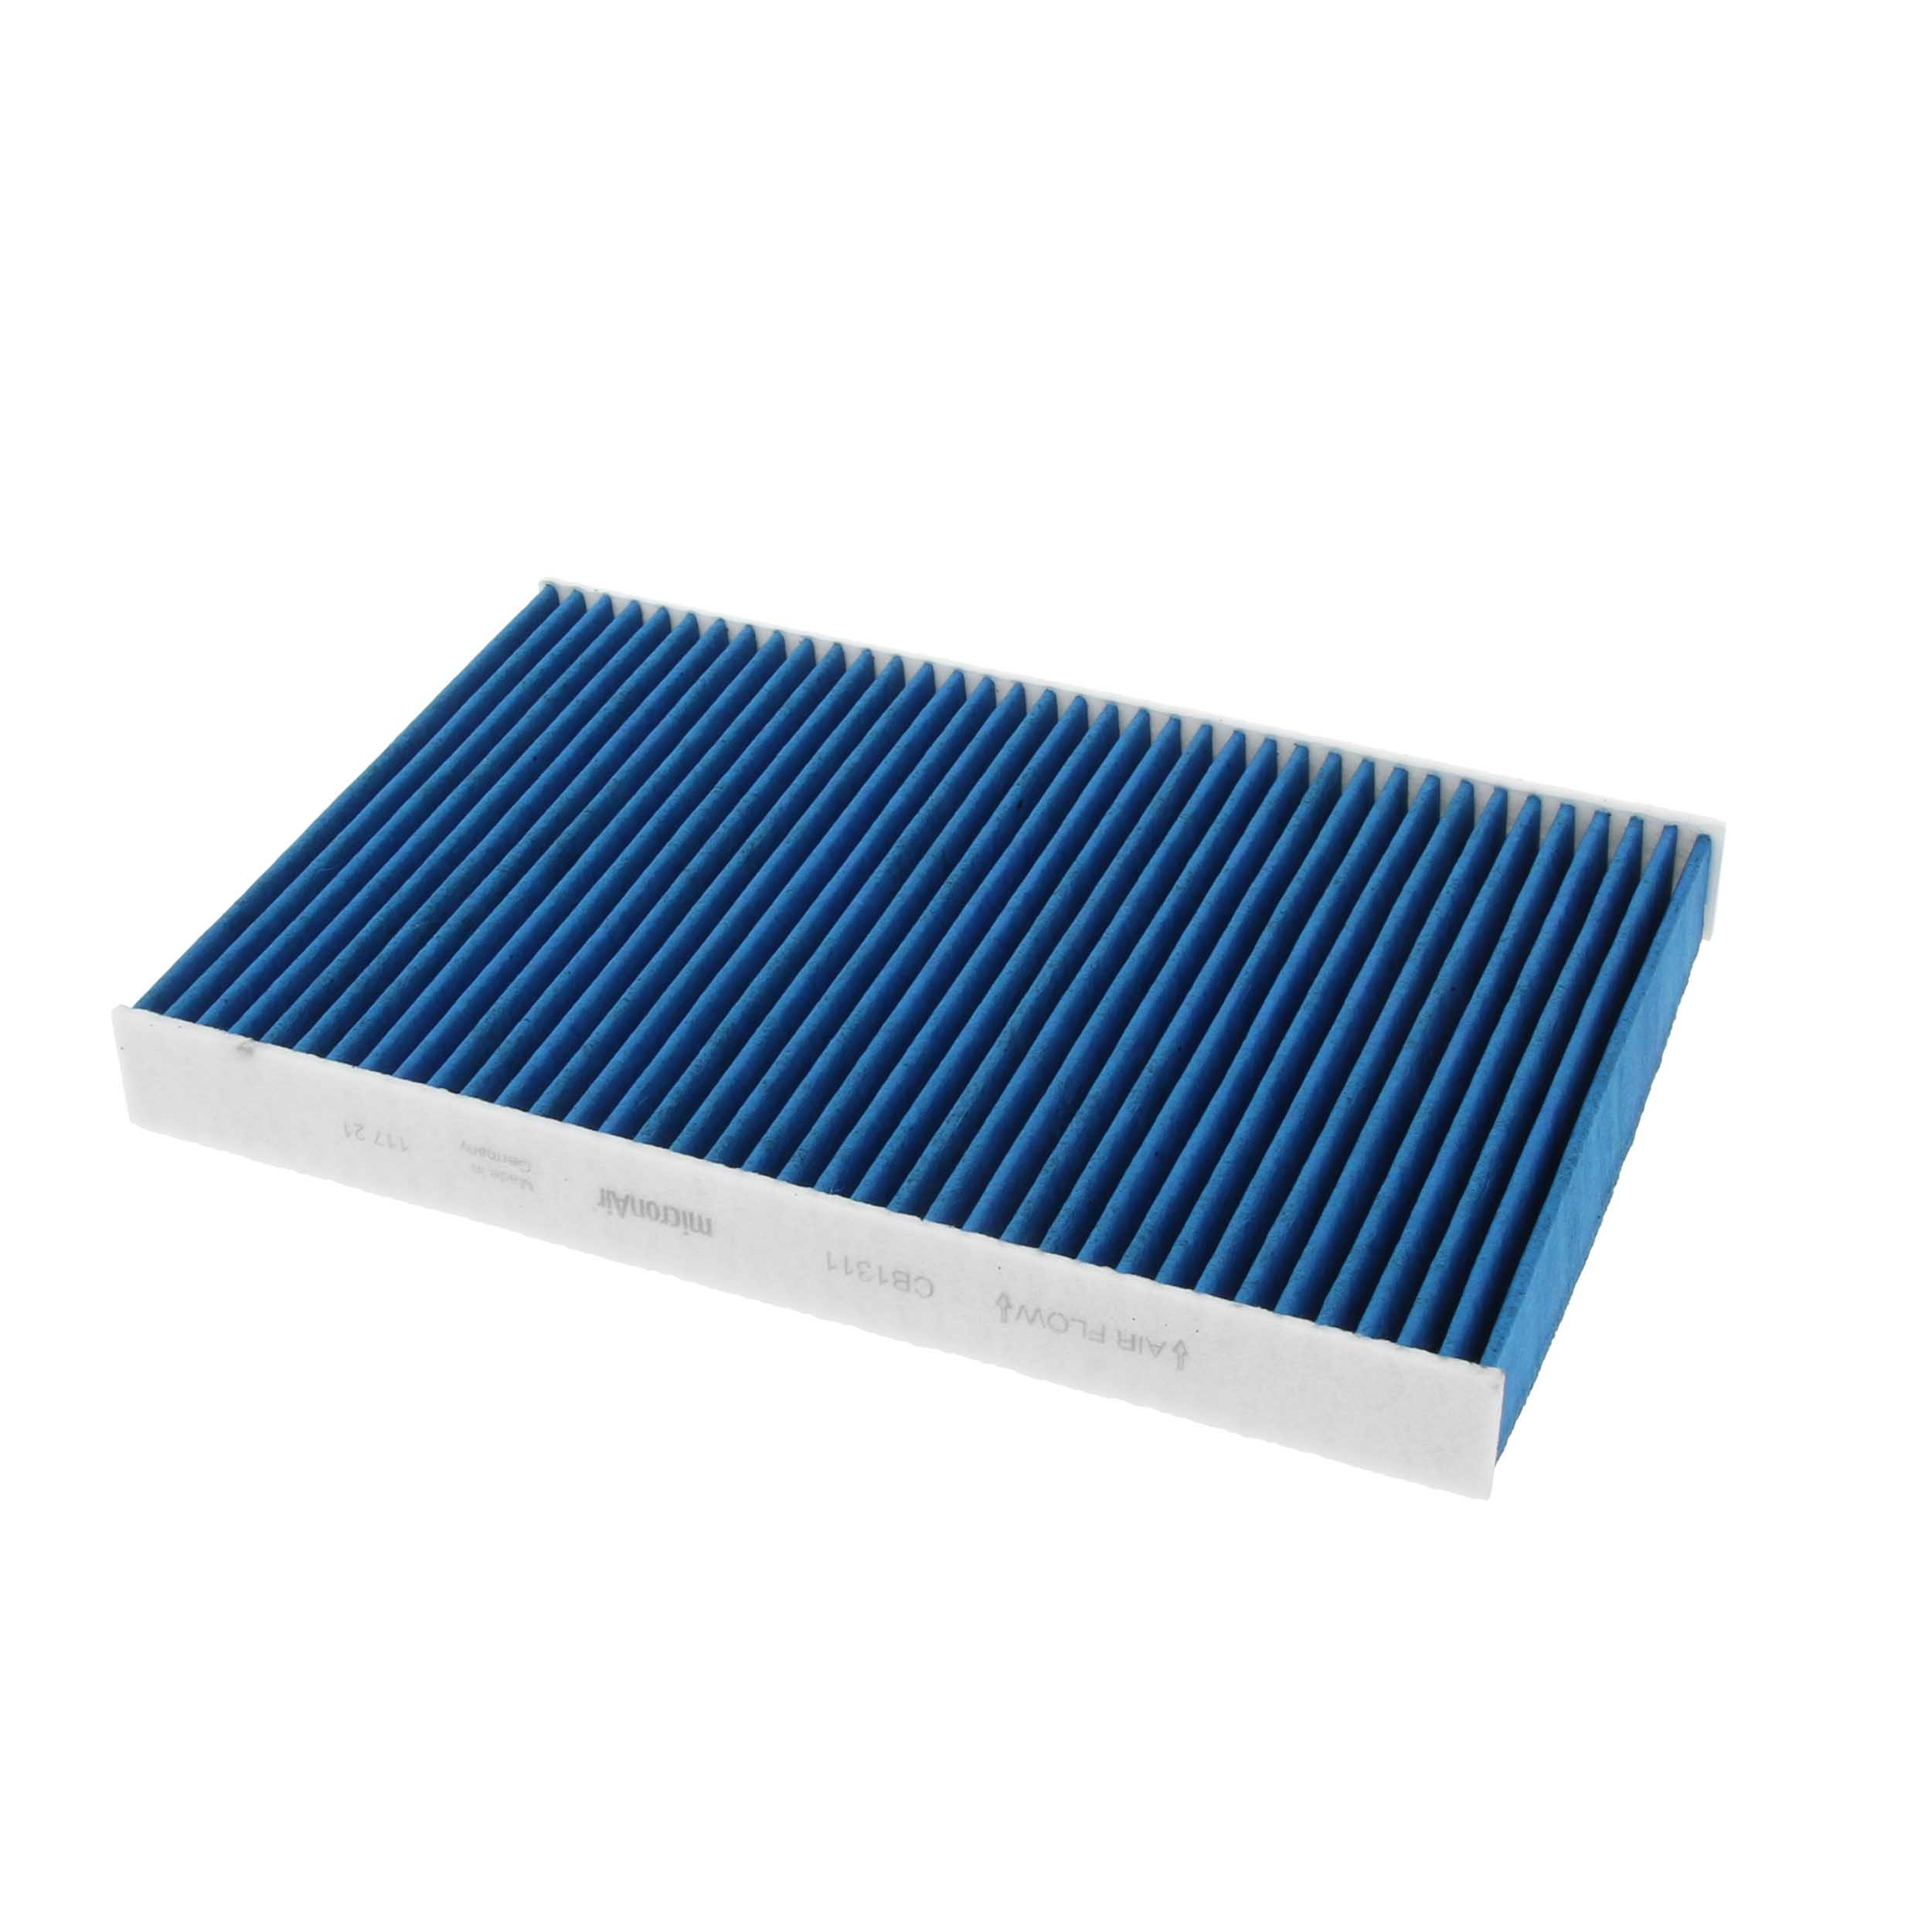 CORTECO Particulate filter (PM 2.5), with anti-allergic effect, with antibacterial action, with fungicidal effect, 291 mm x 191 mm x 30 mm Width: 191mm, Height: 30mm, Length: 291mm Cabin filter 49469994 buy